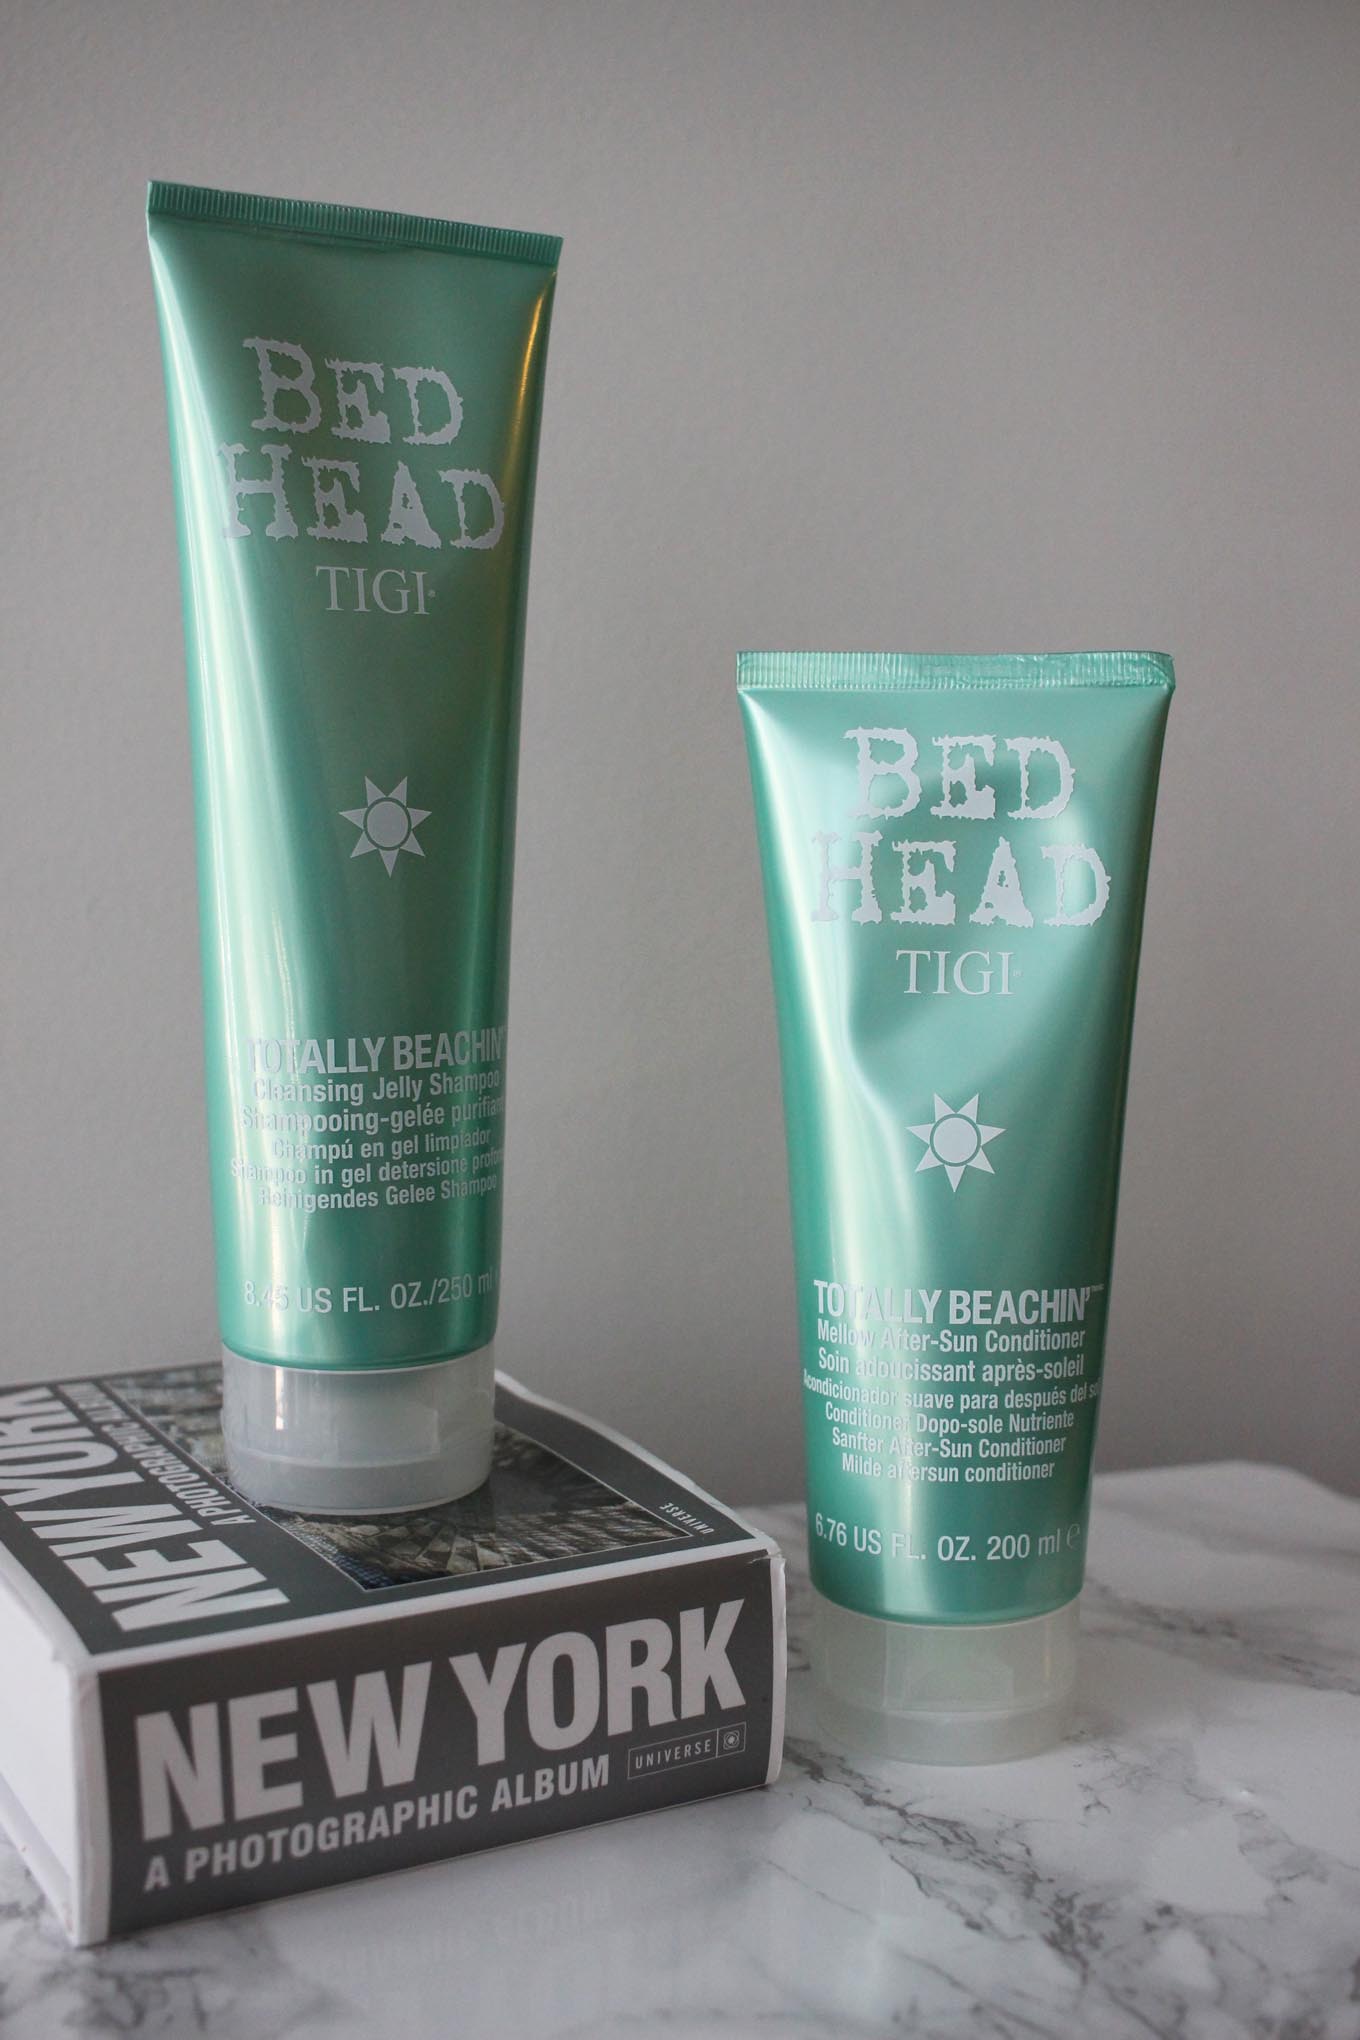 Lifestyle blogger Roxanne of Glass of Glam's review of Bed Head by TIGI hair products